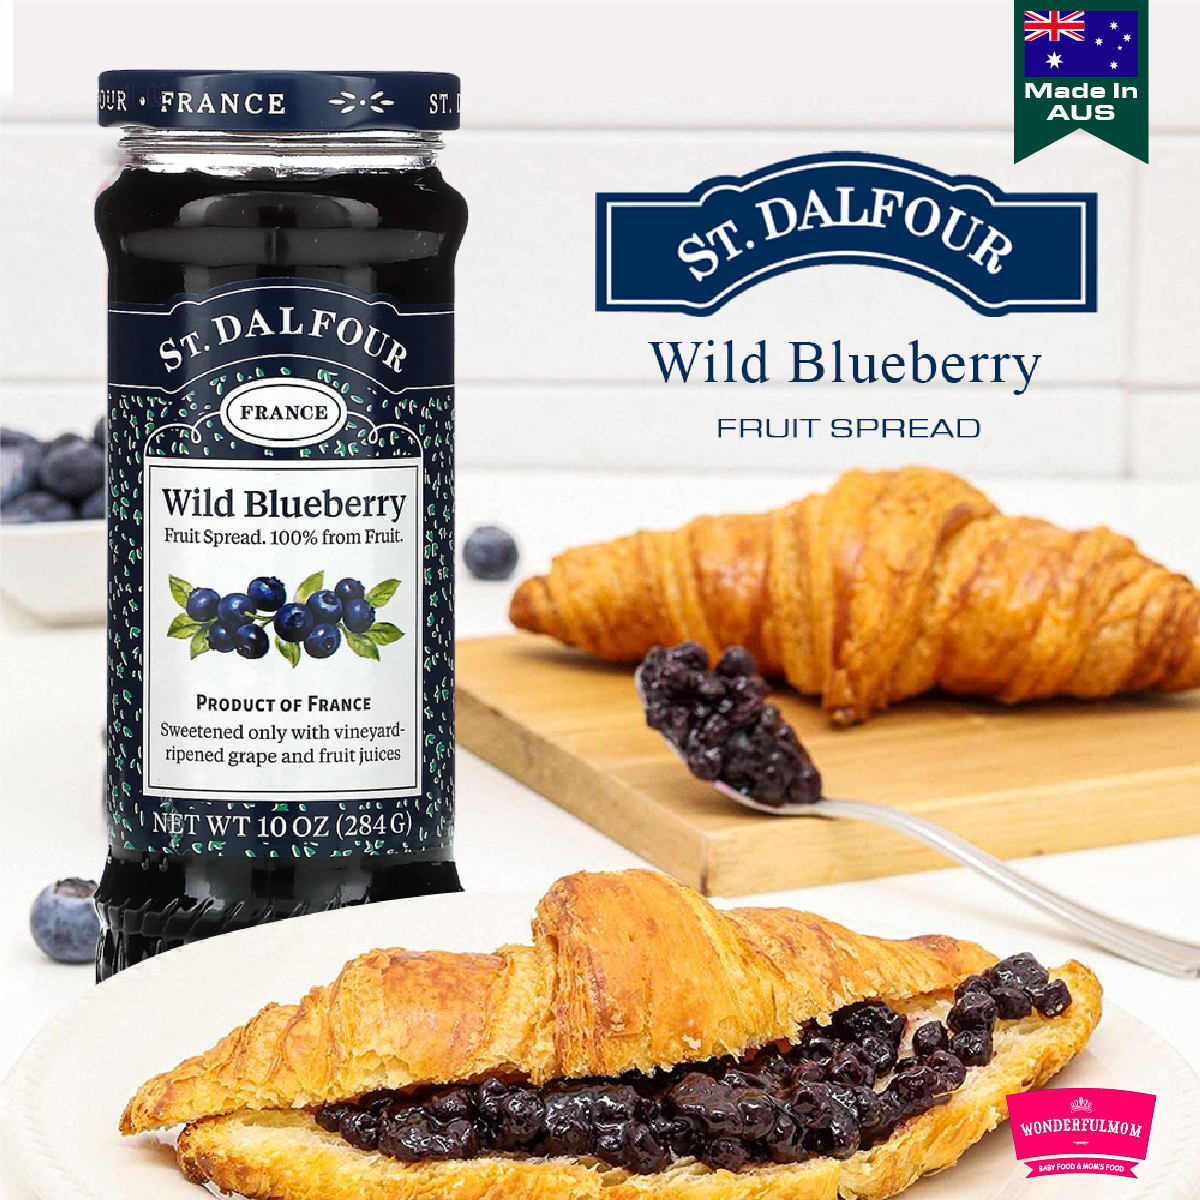 St.Dalfour, France, Wild Blueberry, Fruit Spread